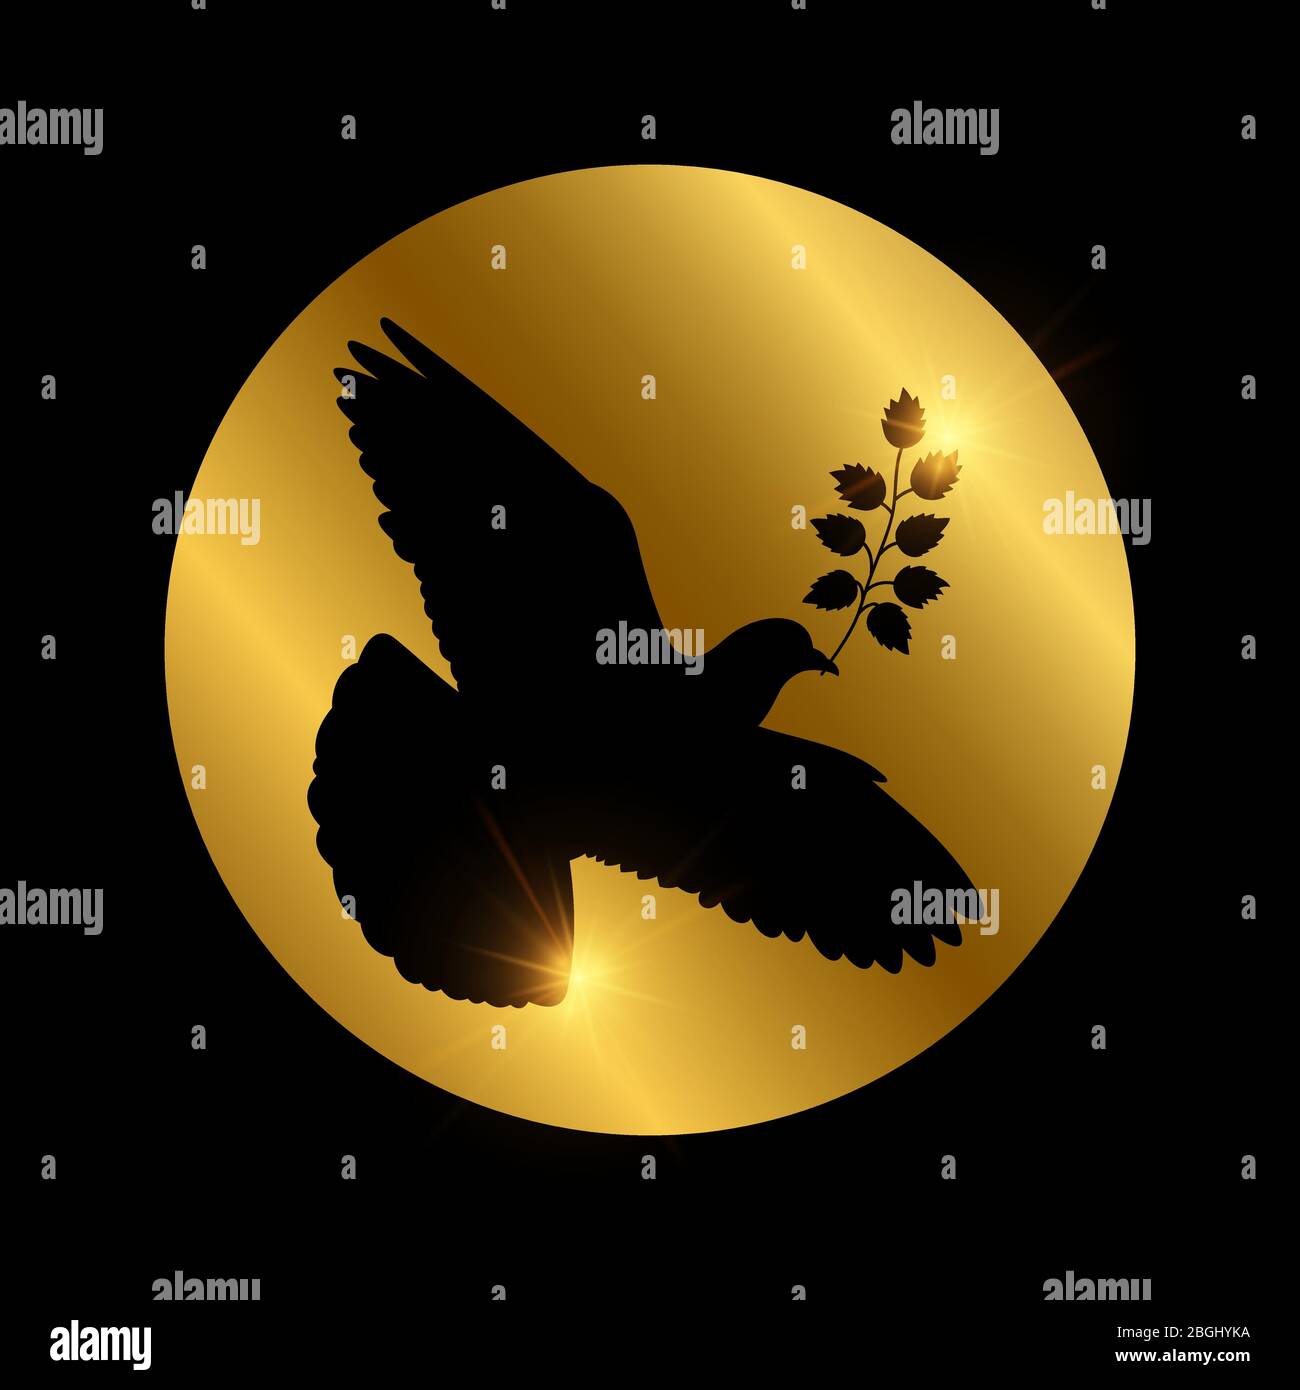 Black dove of piece vector silhouette on golden round illustration Stock Vector